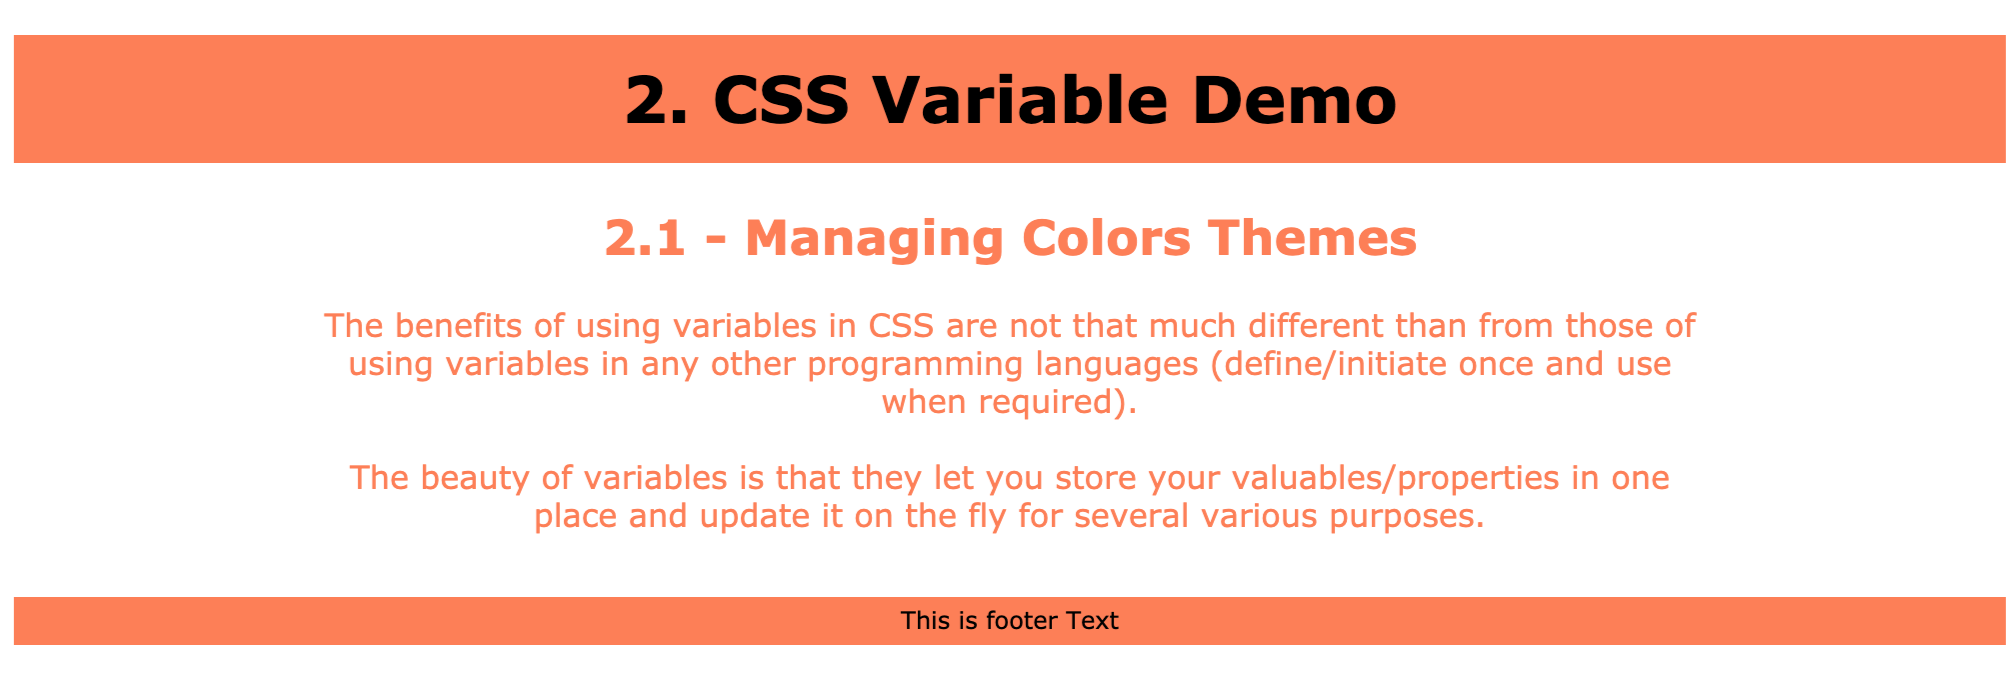 CSS Variables Demo - Managing Colors Themes